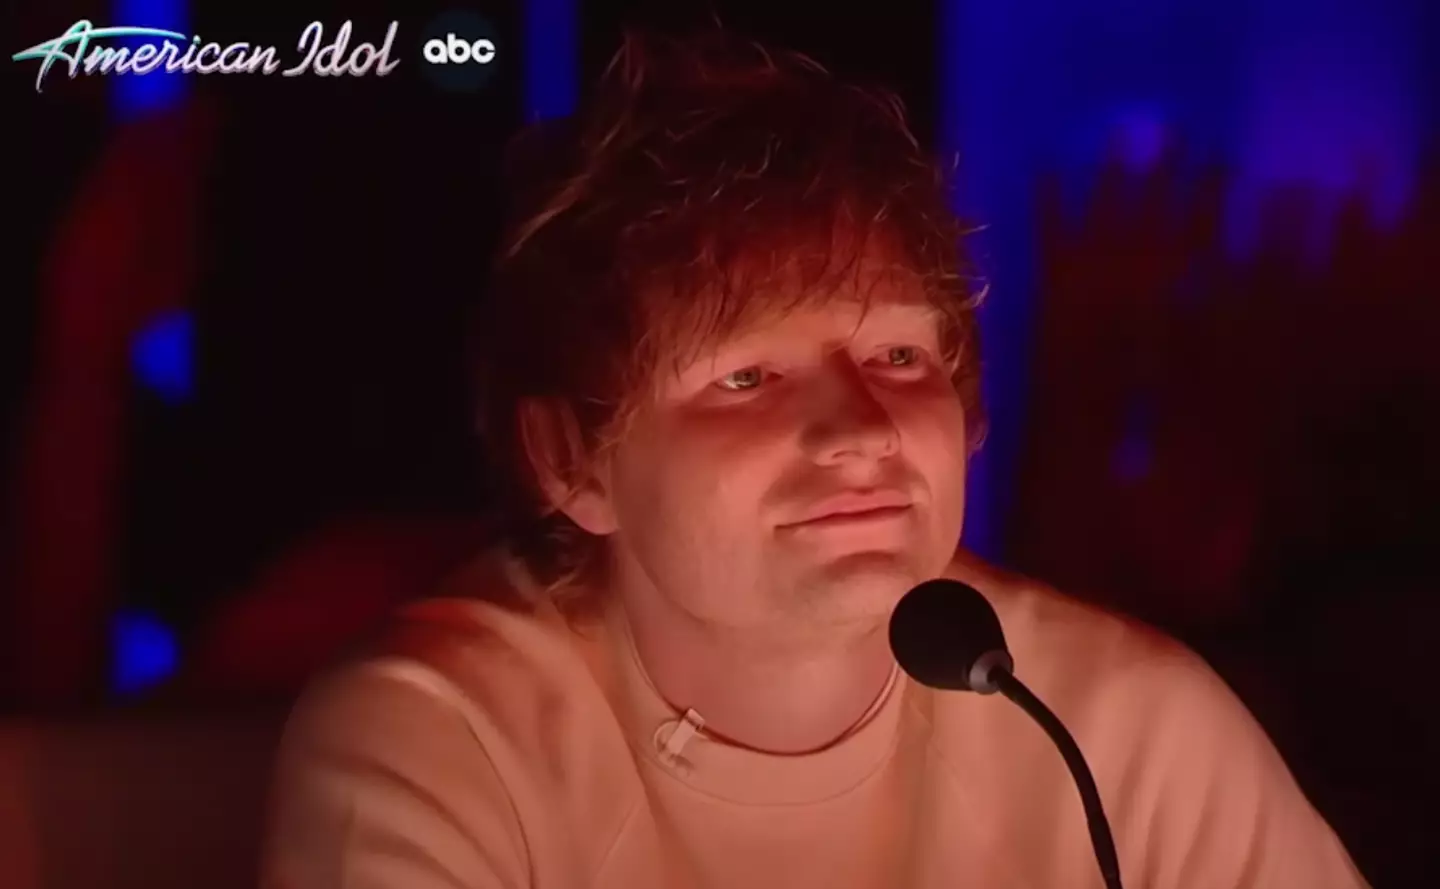 Sheeran looked incredibly moved by the performance.